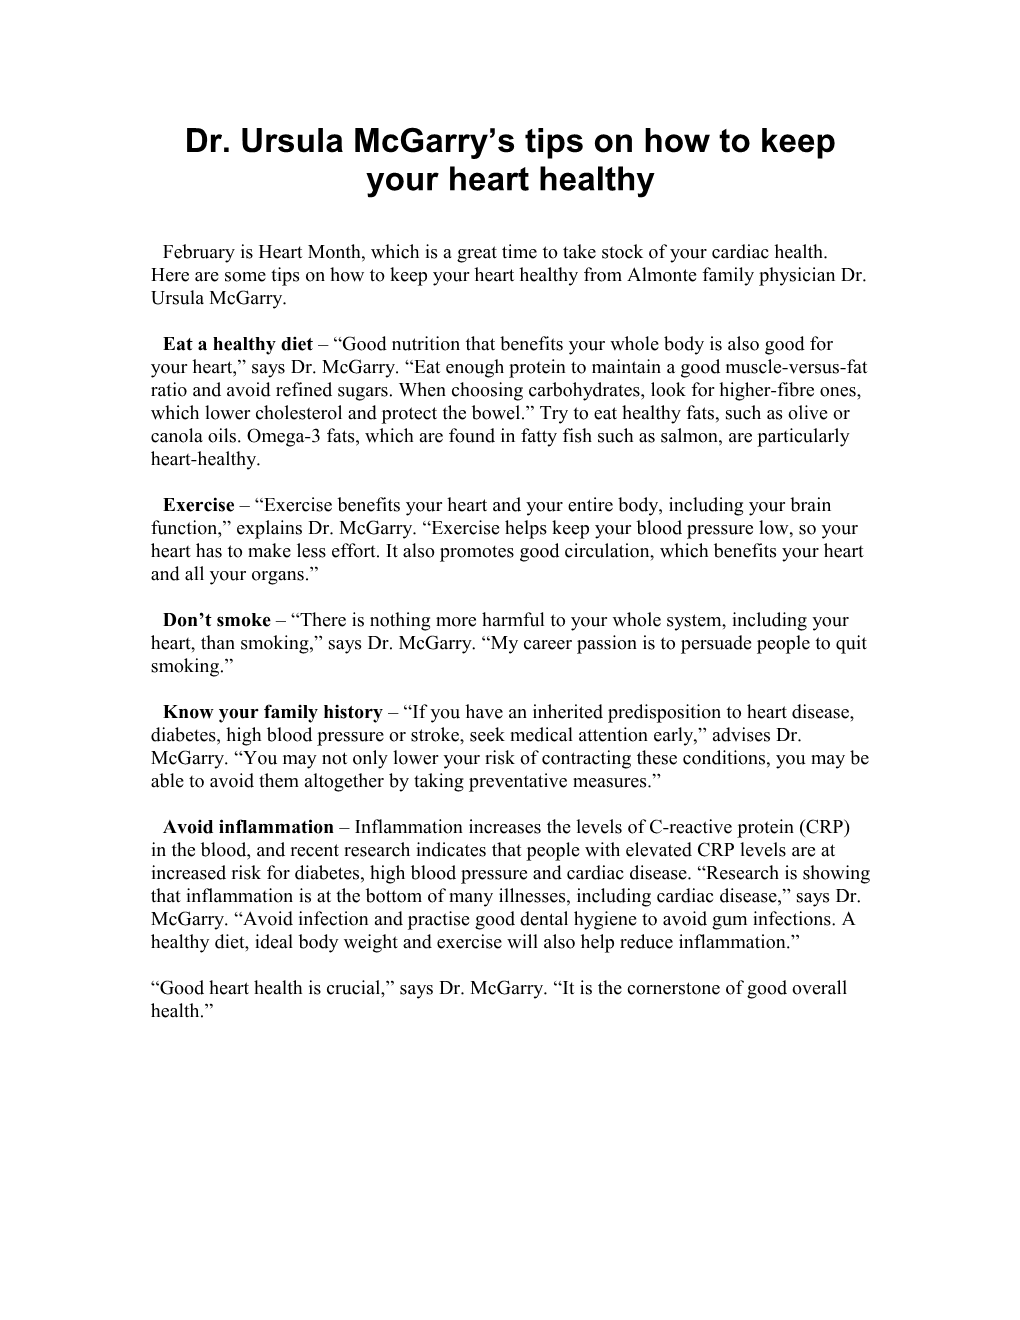 Dr. Ursula Mcgarry S Tips on How to Keep Your Heart Healthy